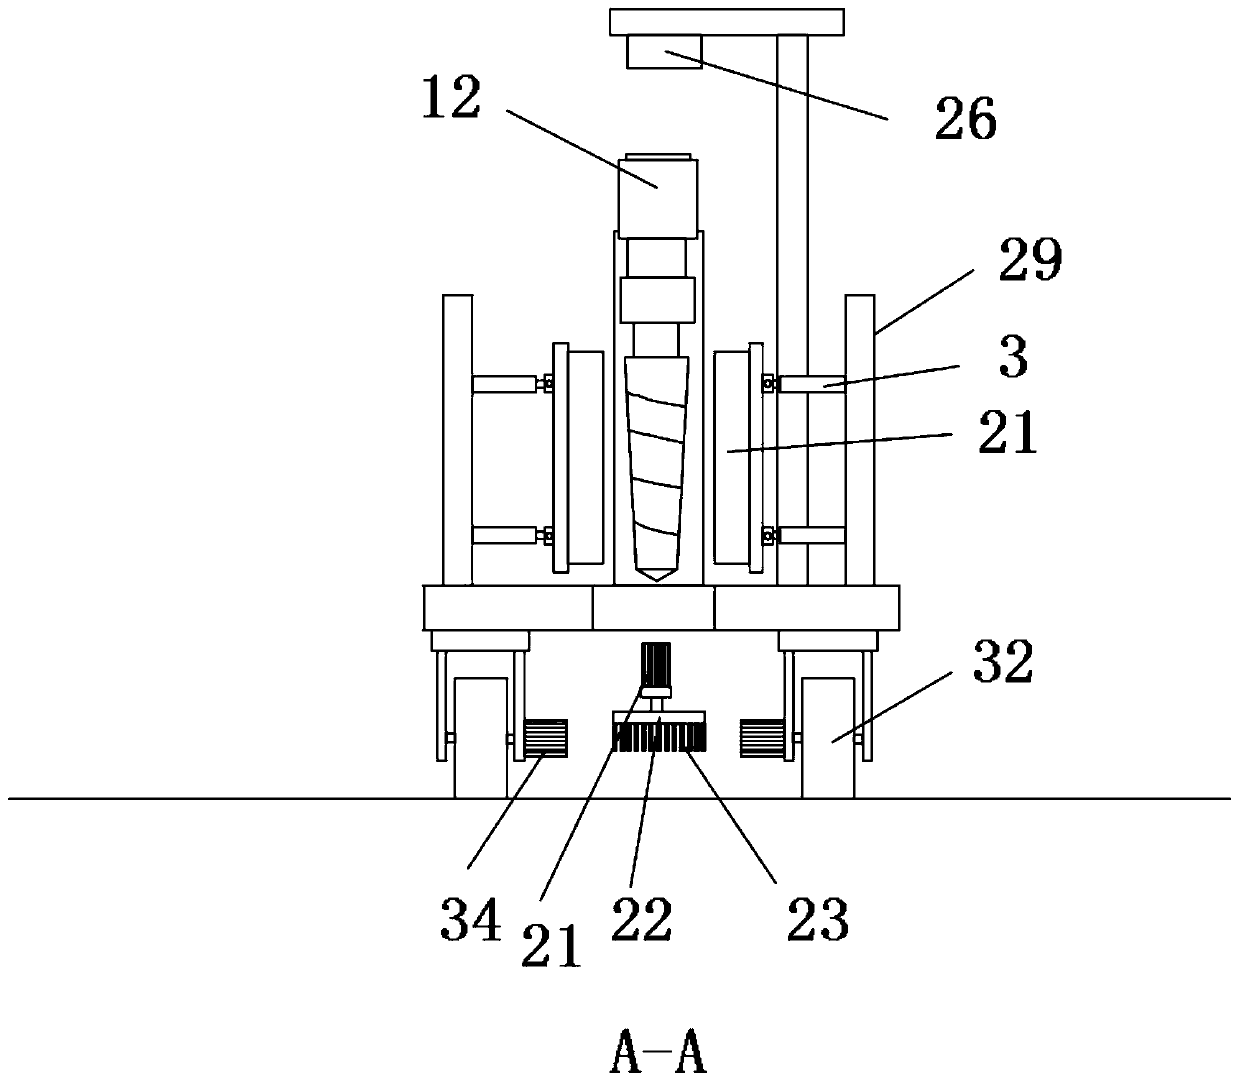 Online soil detection device and method